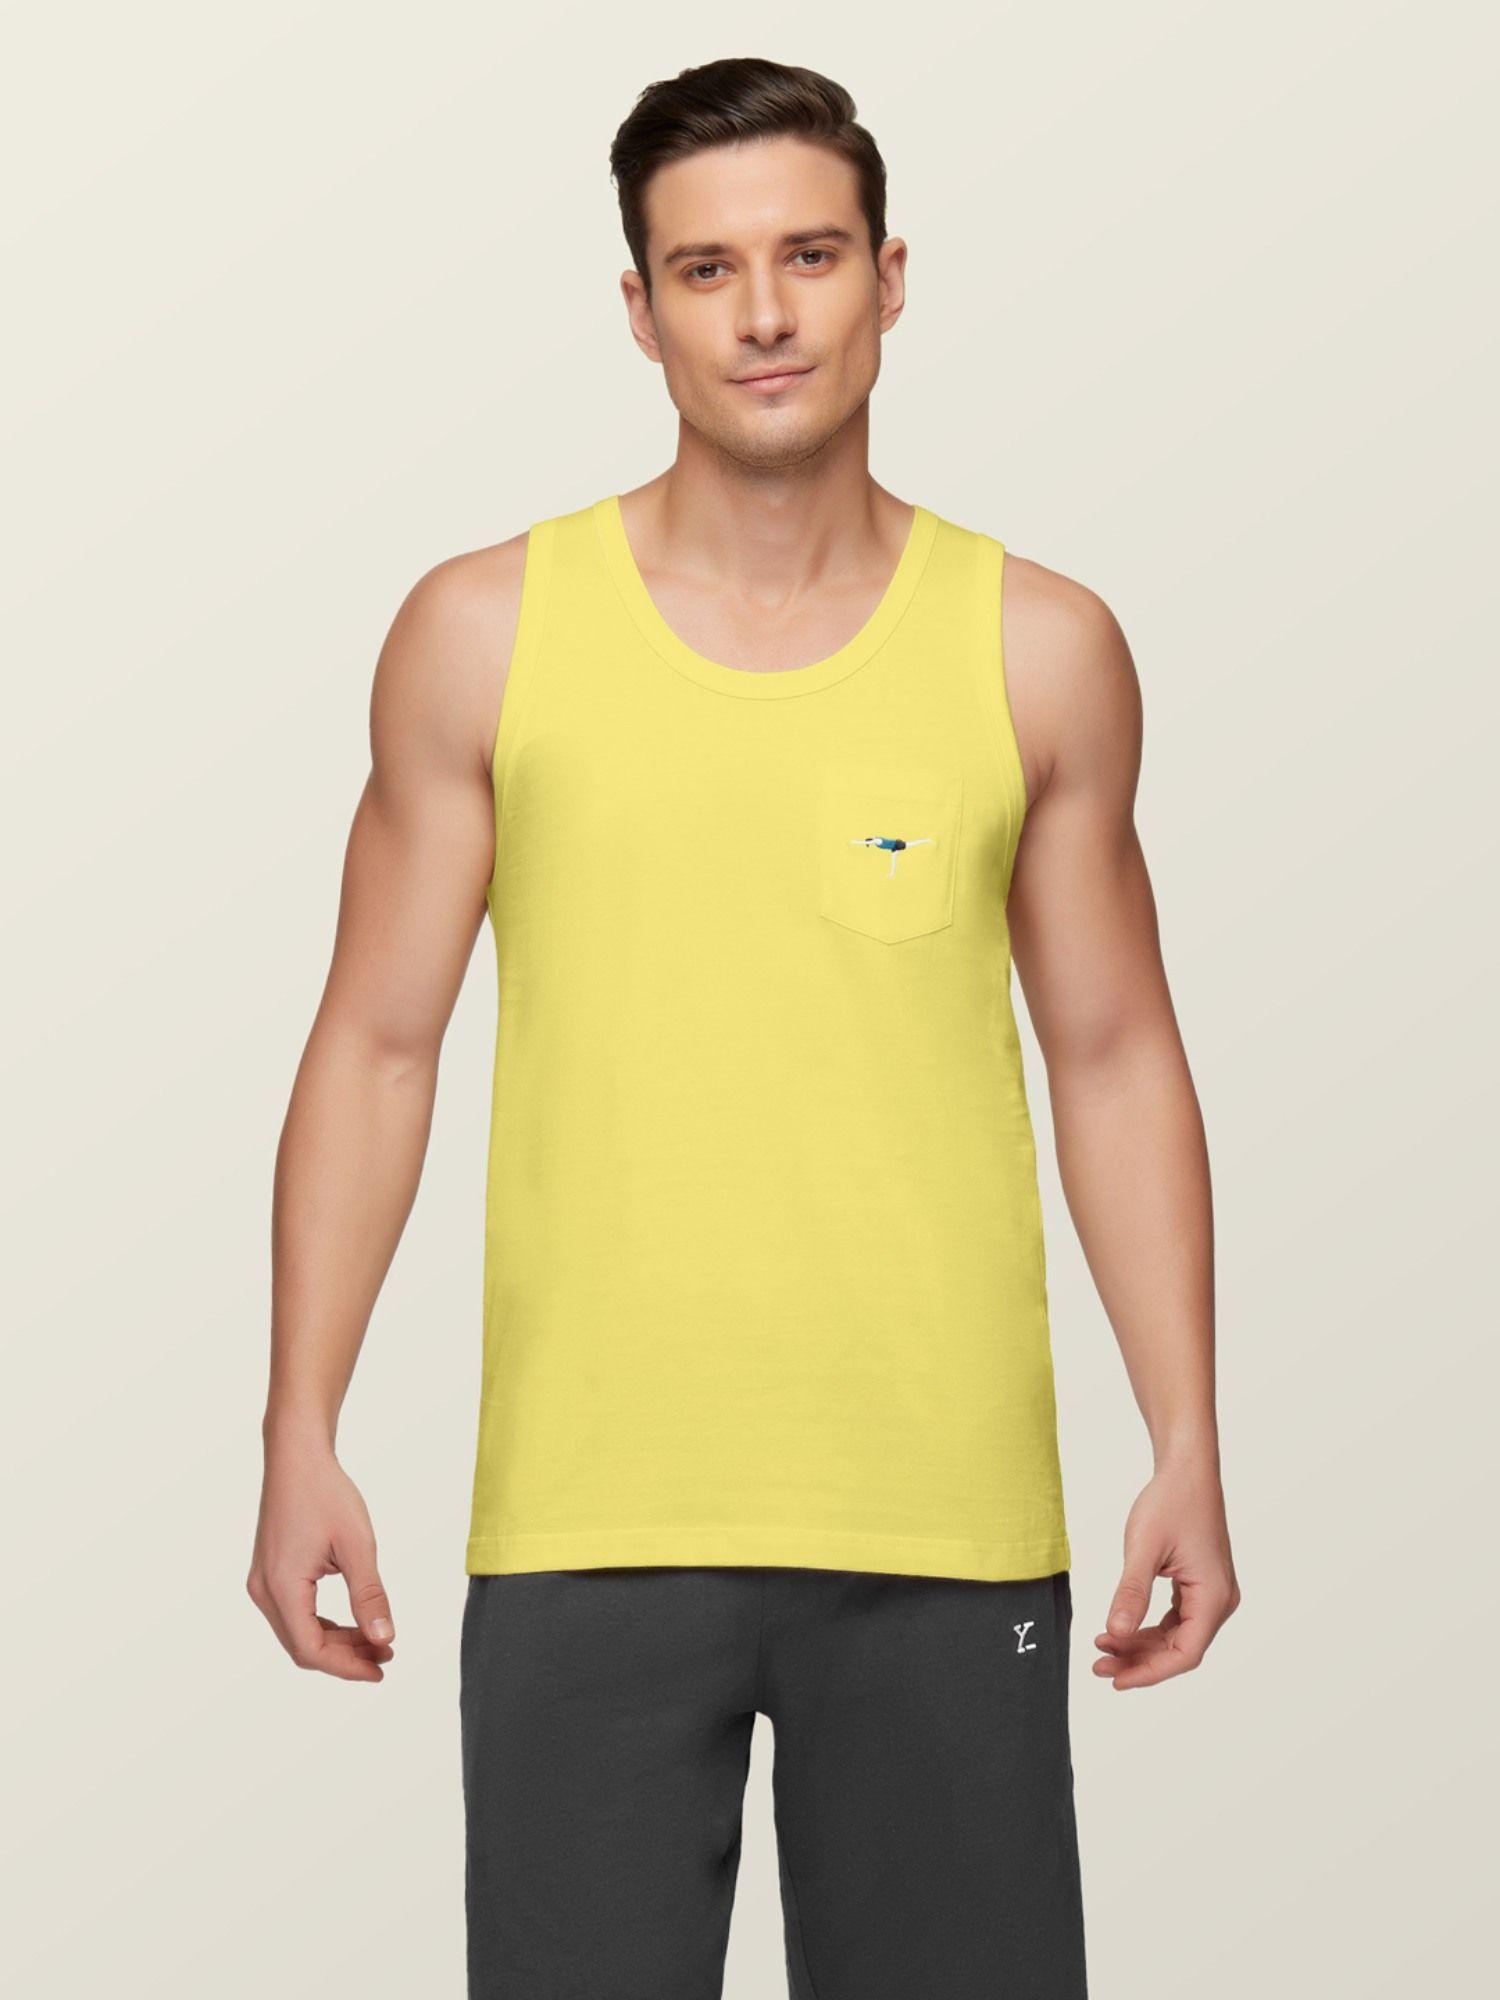 super combed cotton renew vest high moisture absorbing for men yellow